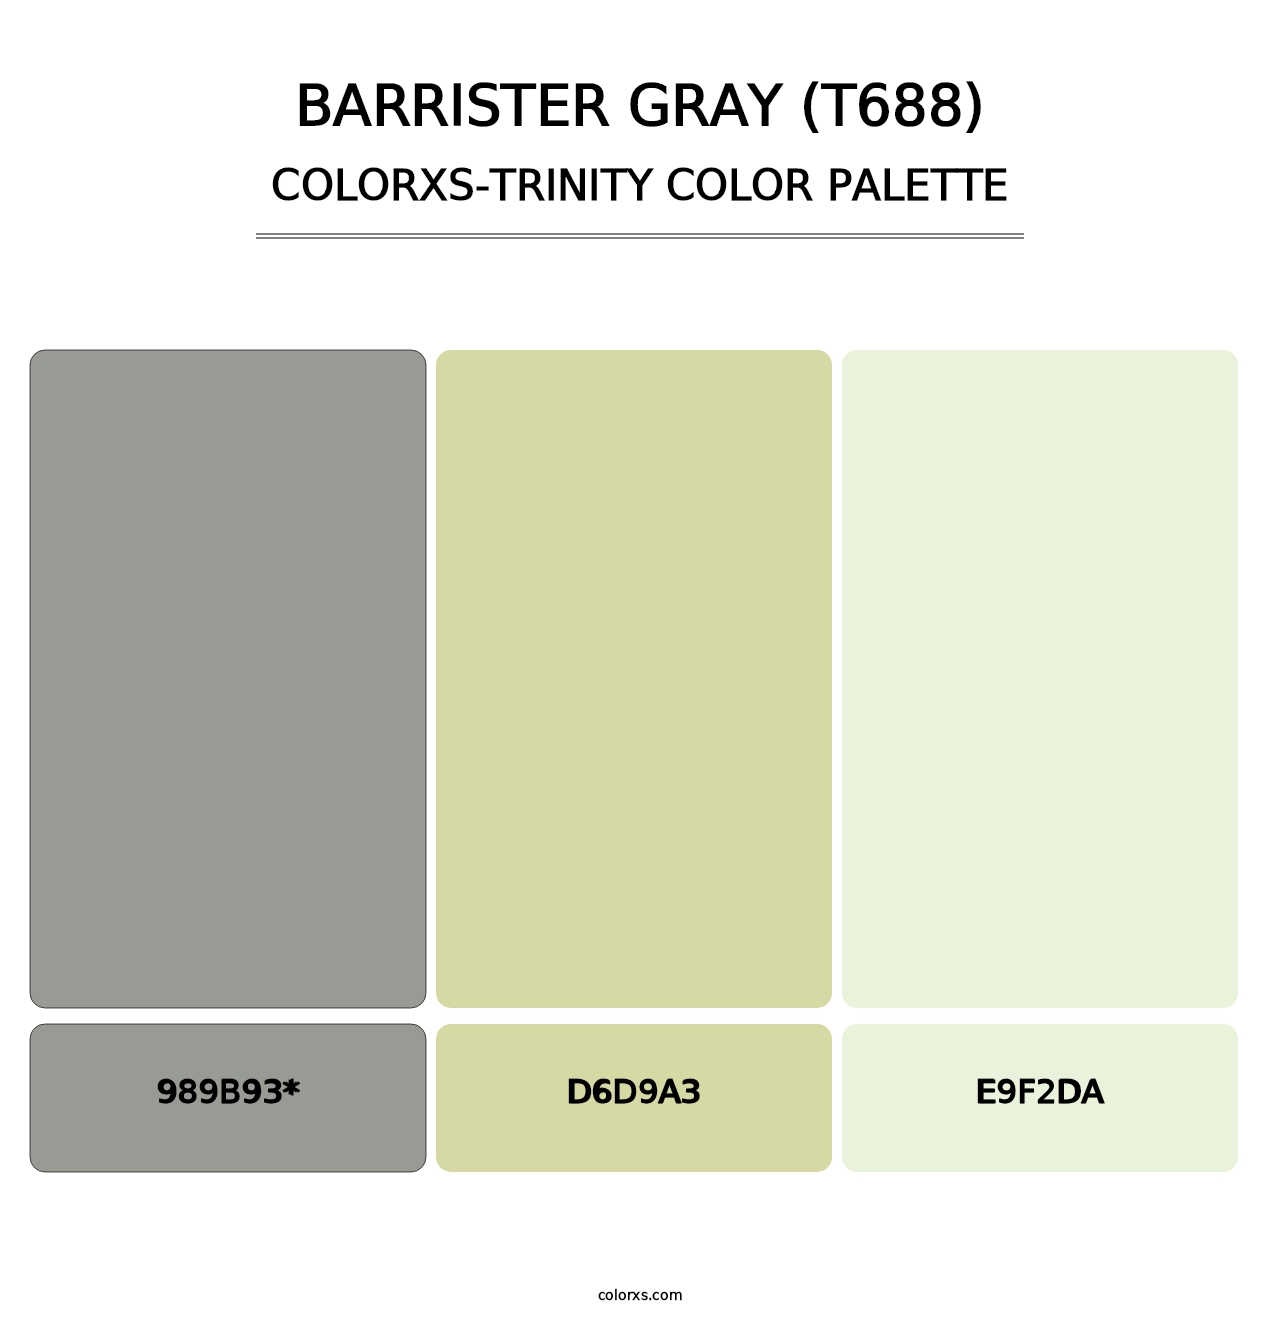 Barrister Gray (T688) - Colorxs Trinity Palette